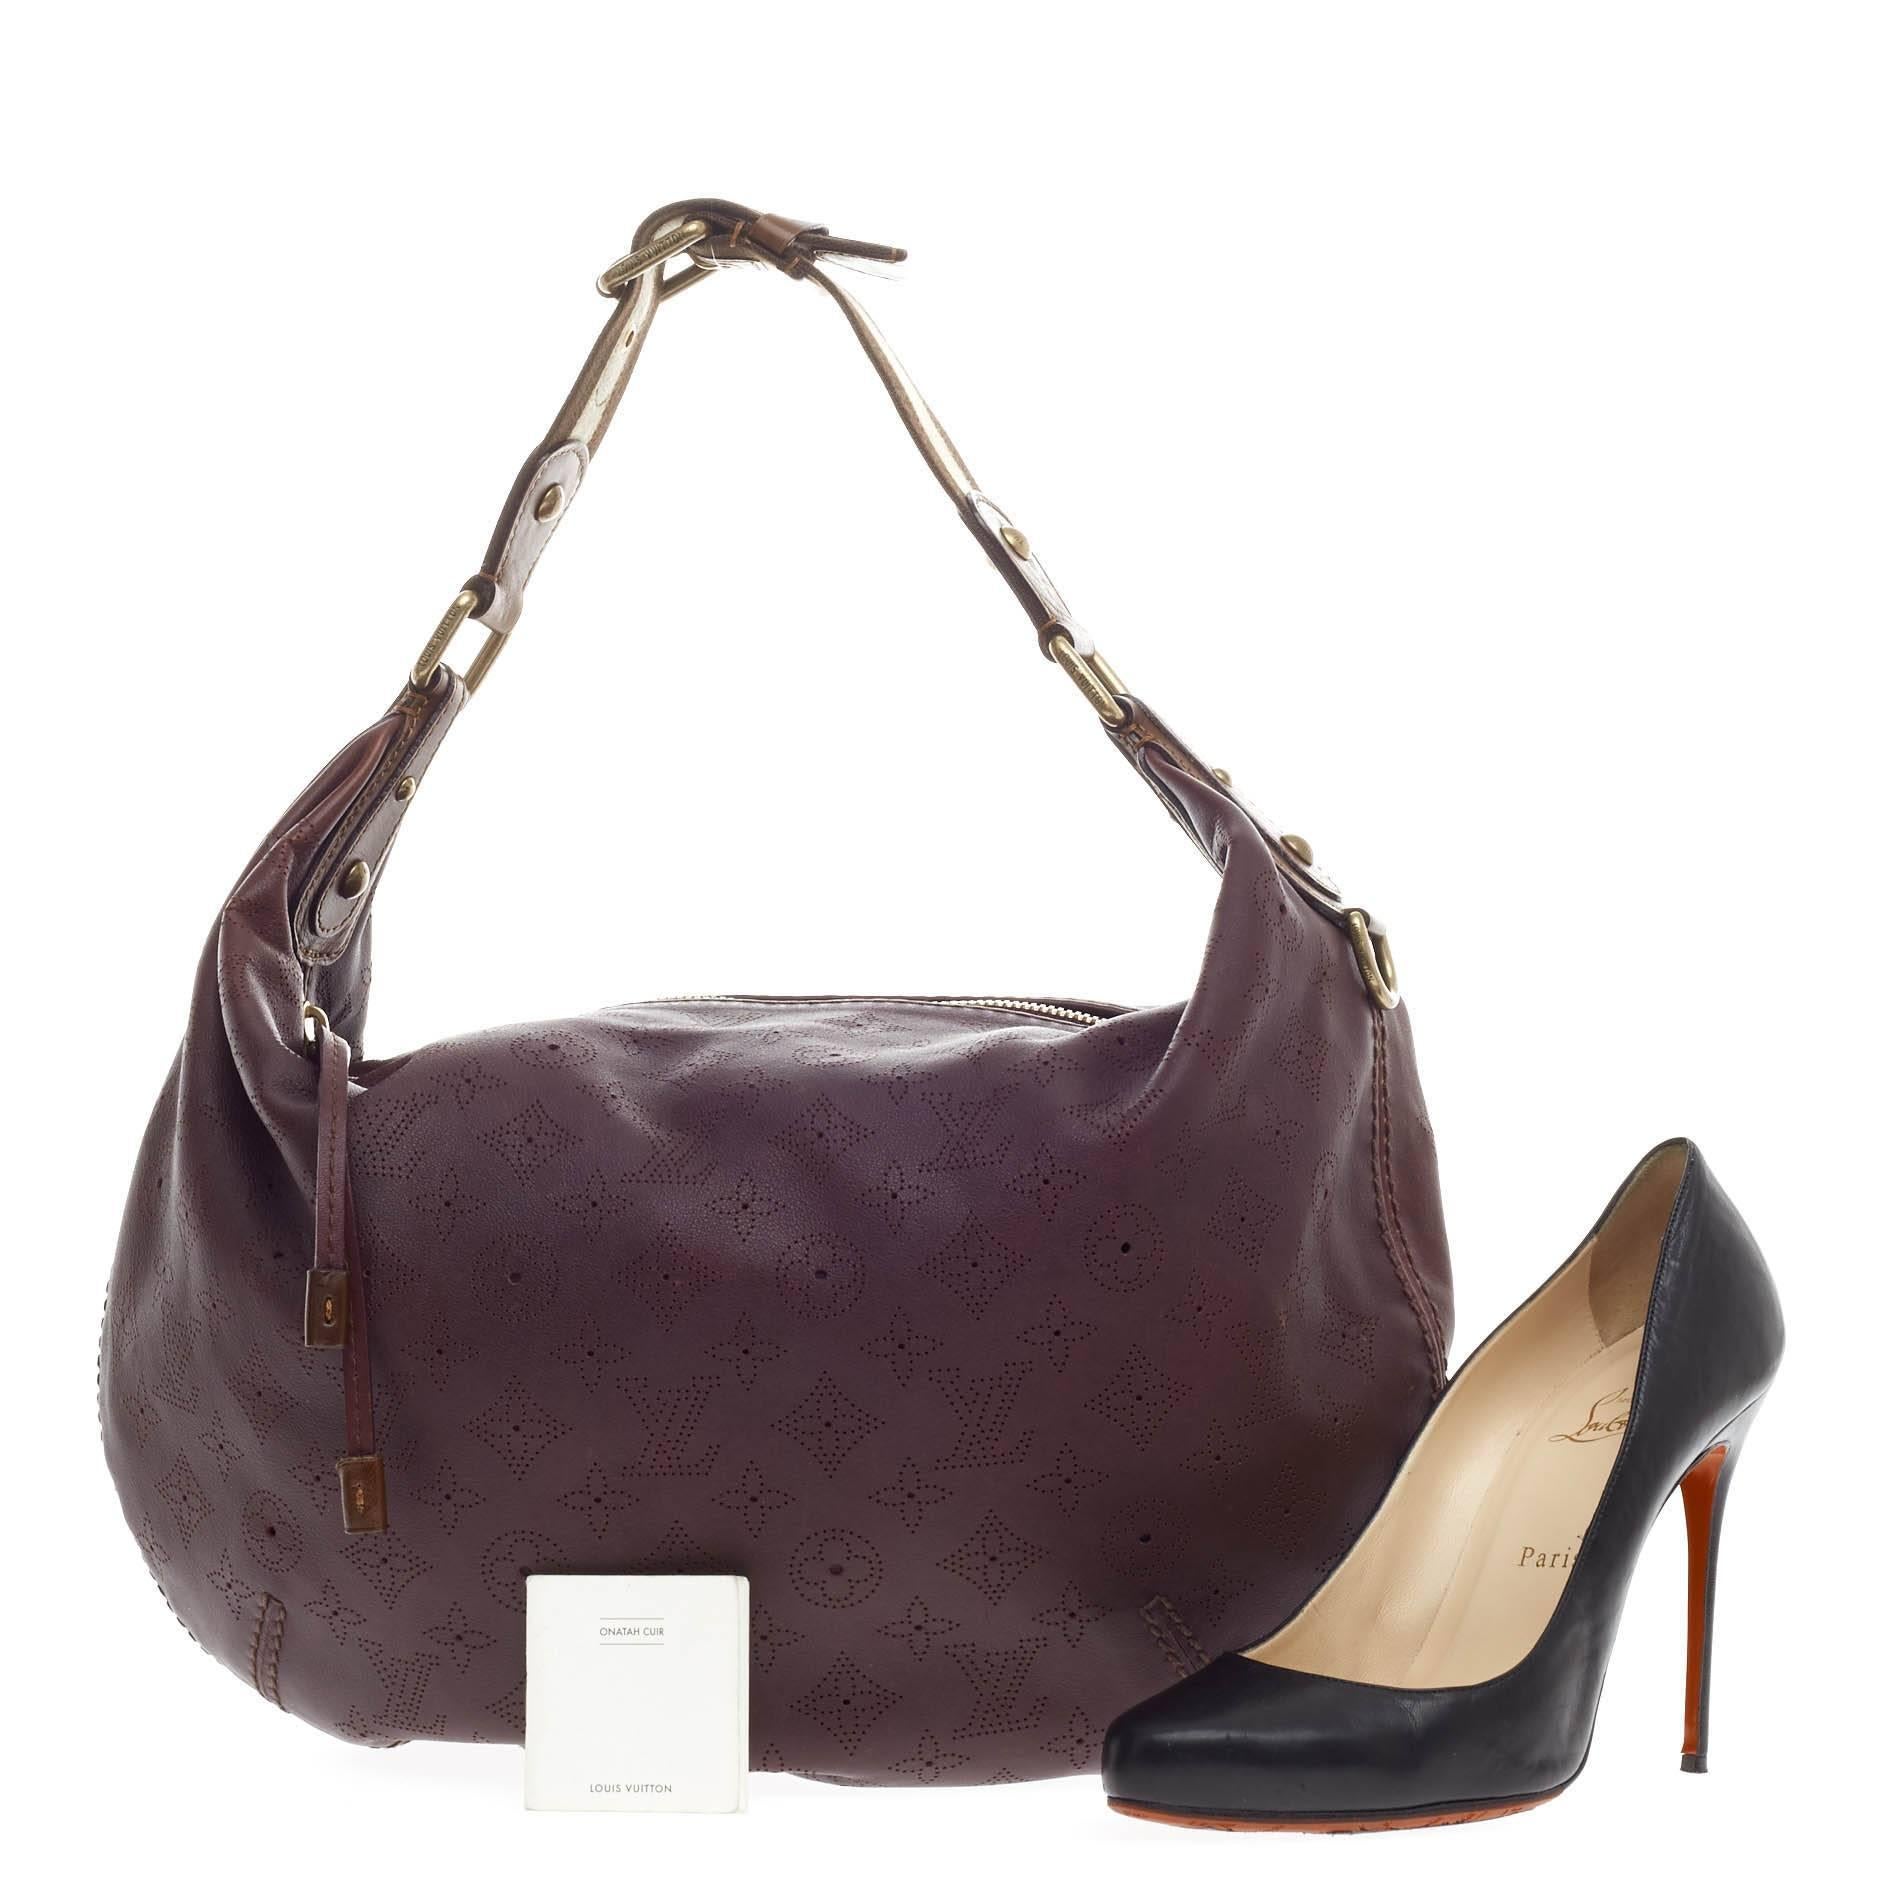 This authentic Louis Vuitton Onatah Hobo Mahina Leather GM is a stylish and functional must-have for LV lovers. Crafted from the brand's signature aubergine purple mahina leather, this hobo features single a subtle perforated monogram design,